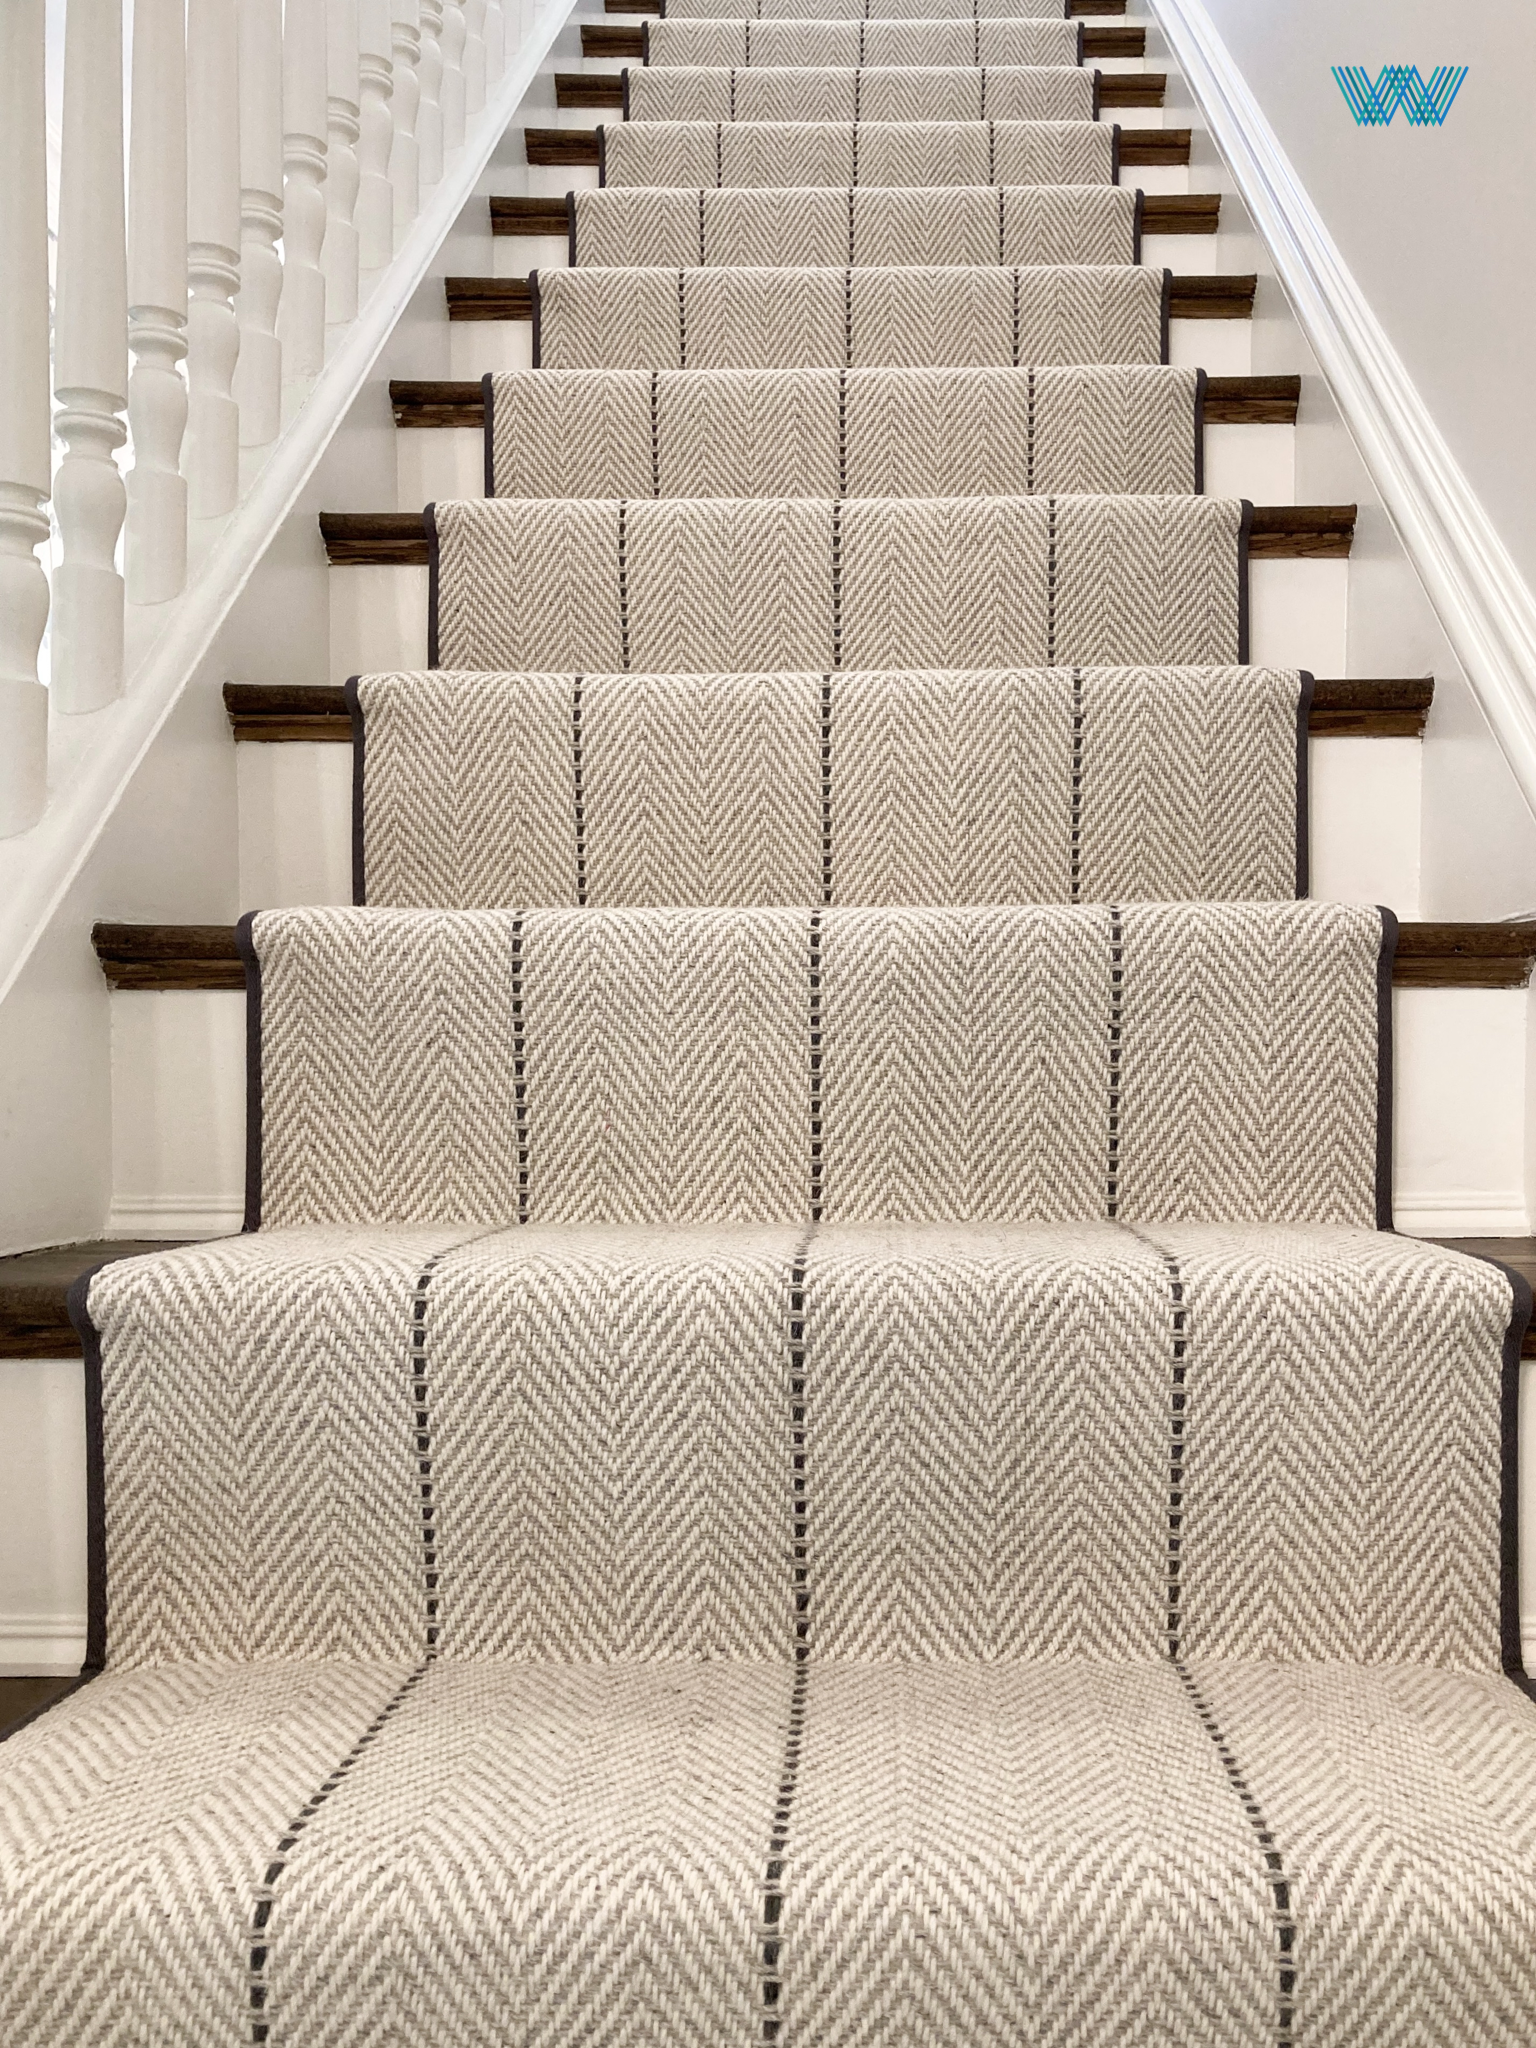 Stair runners by the foot